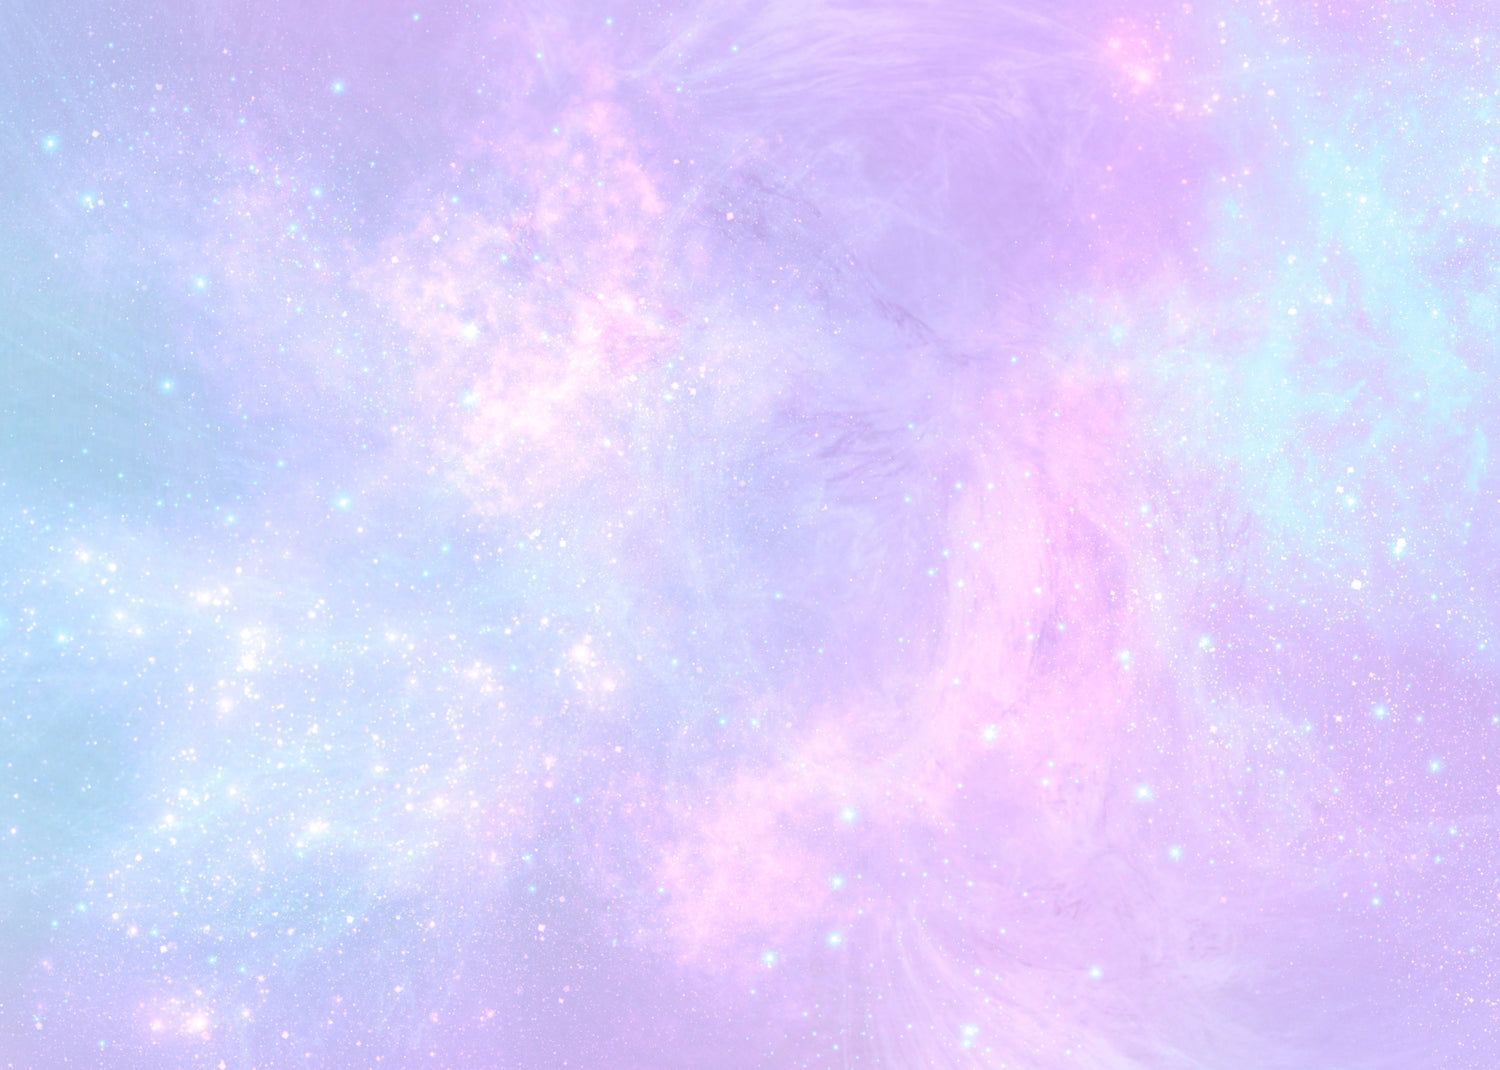 A purple and blue galaxy with white stars - Witchcore